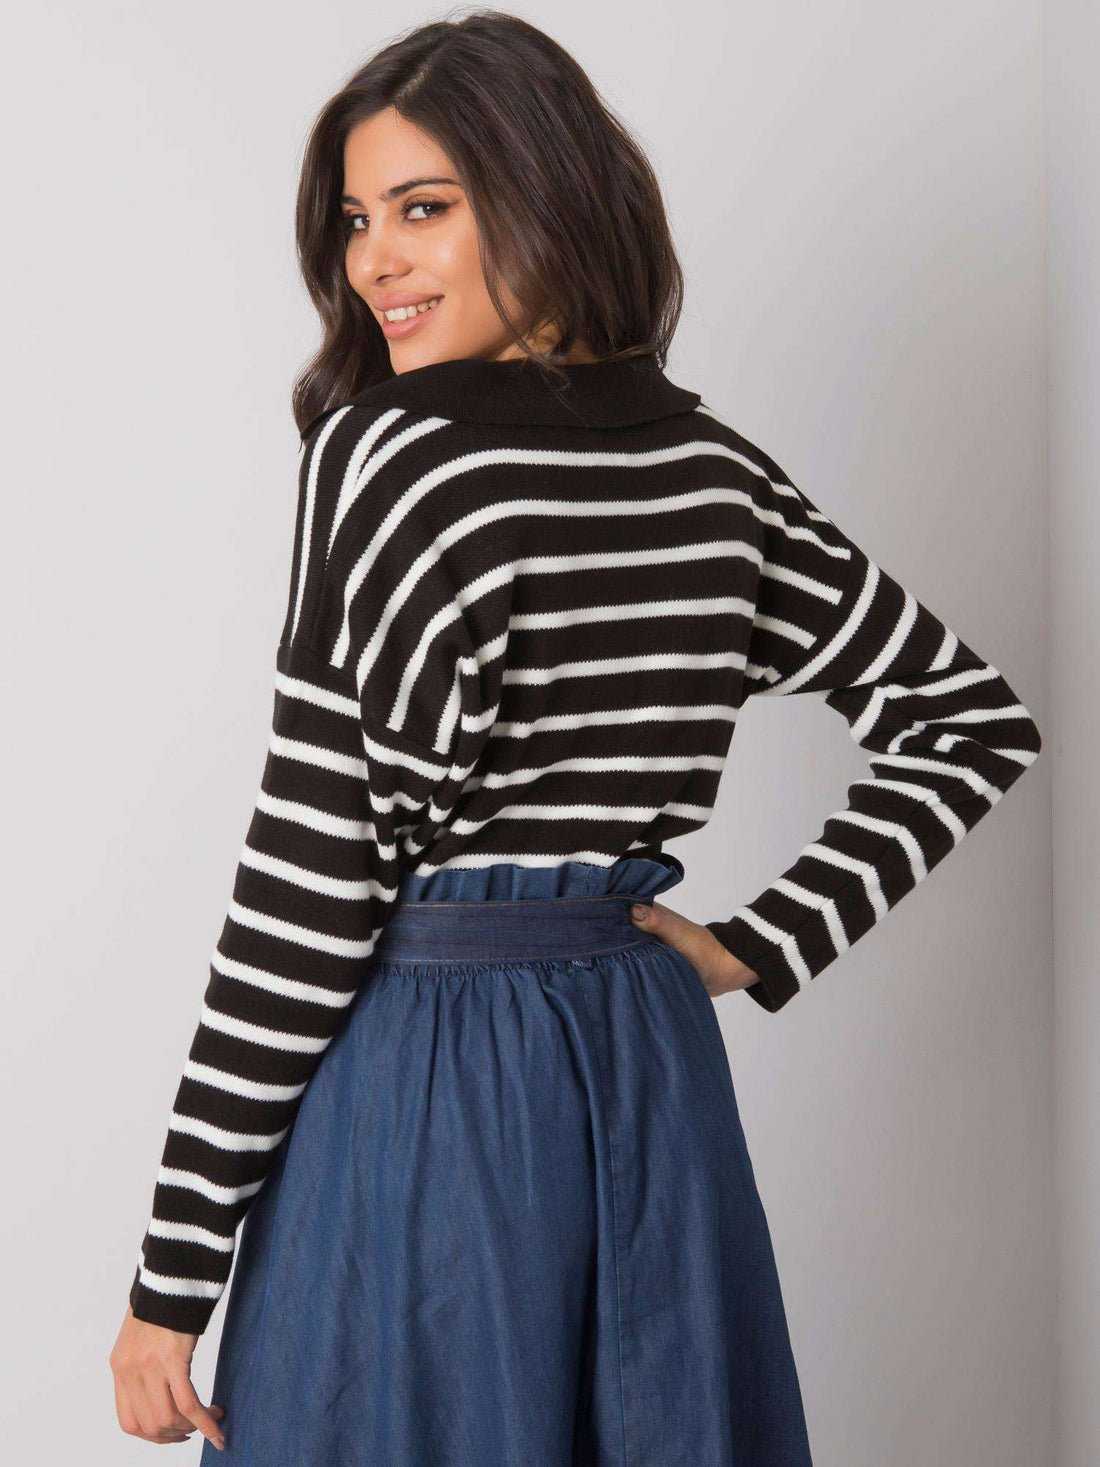 Striped Sweater Black and White